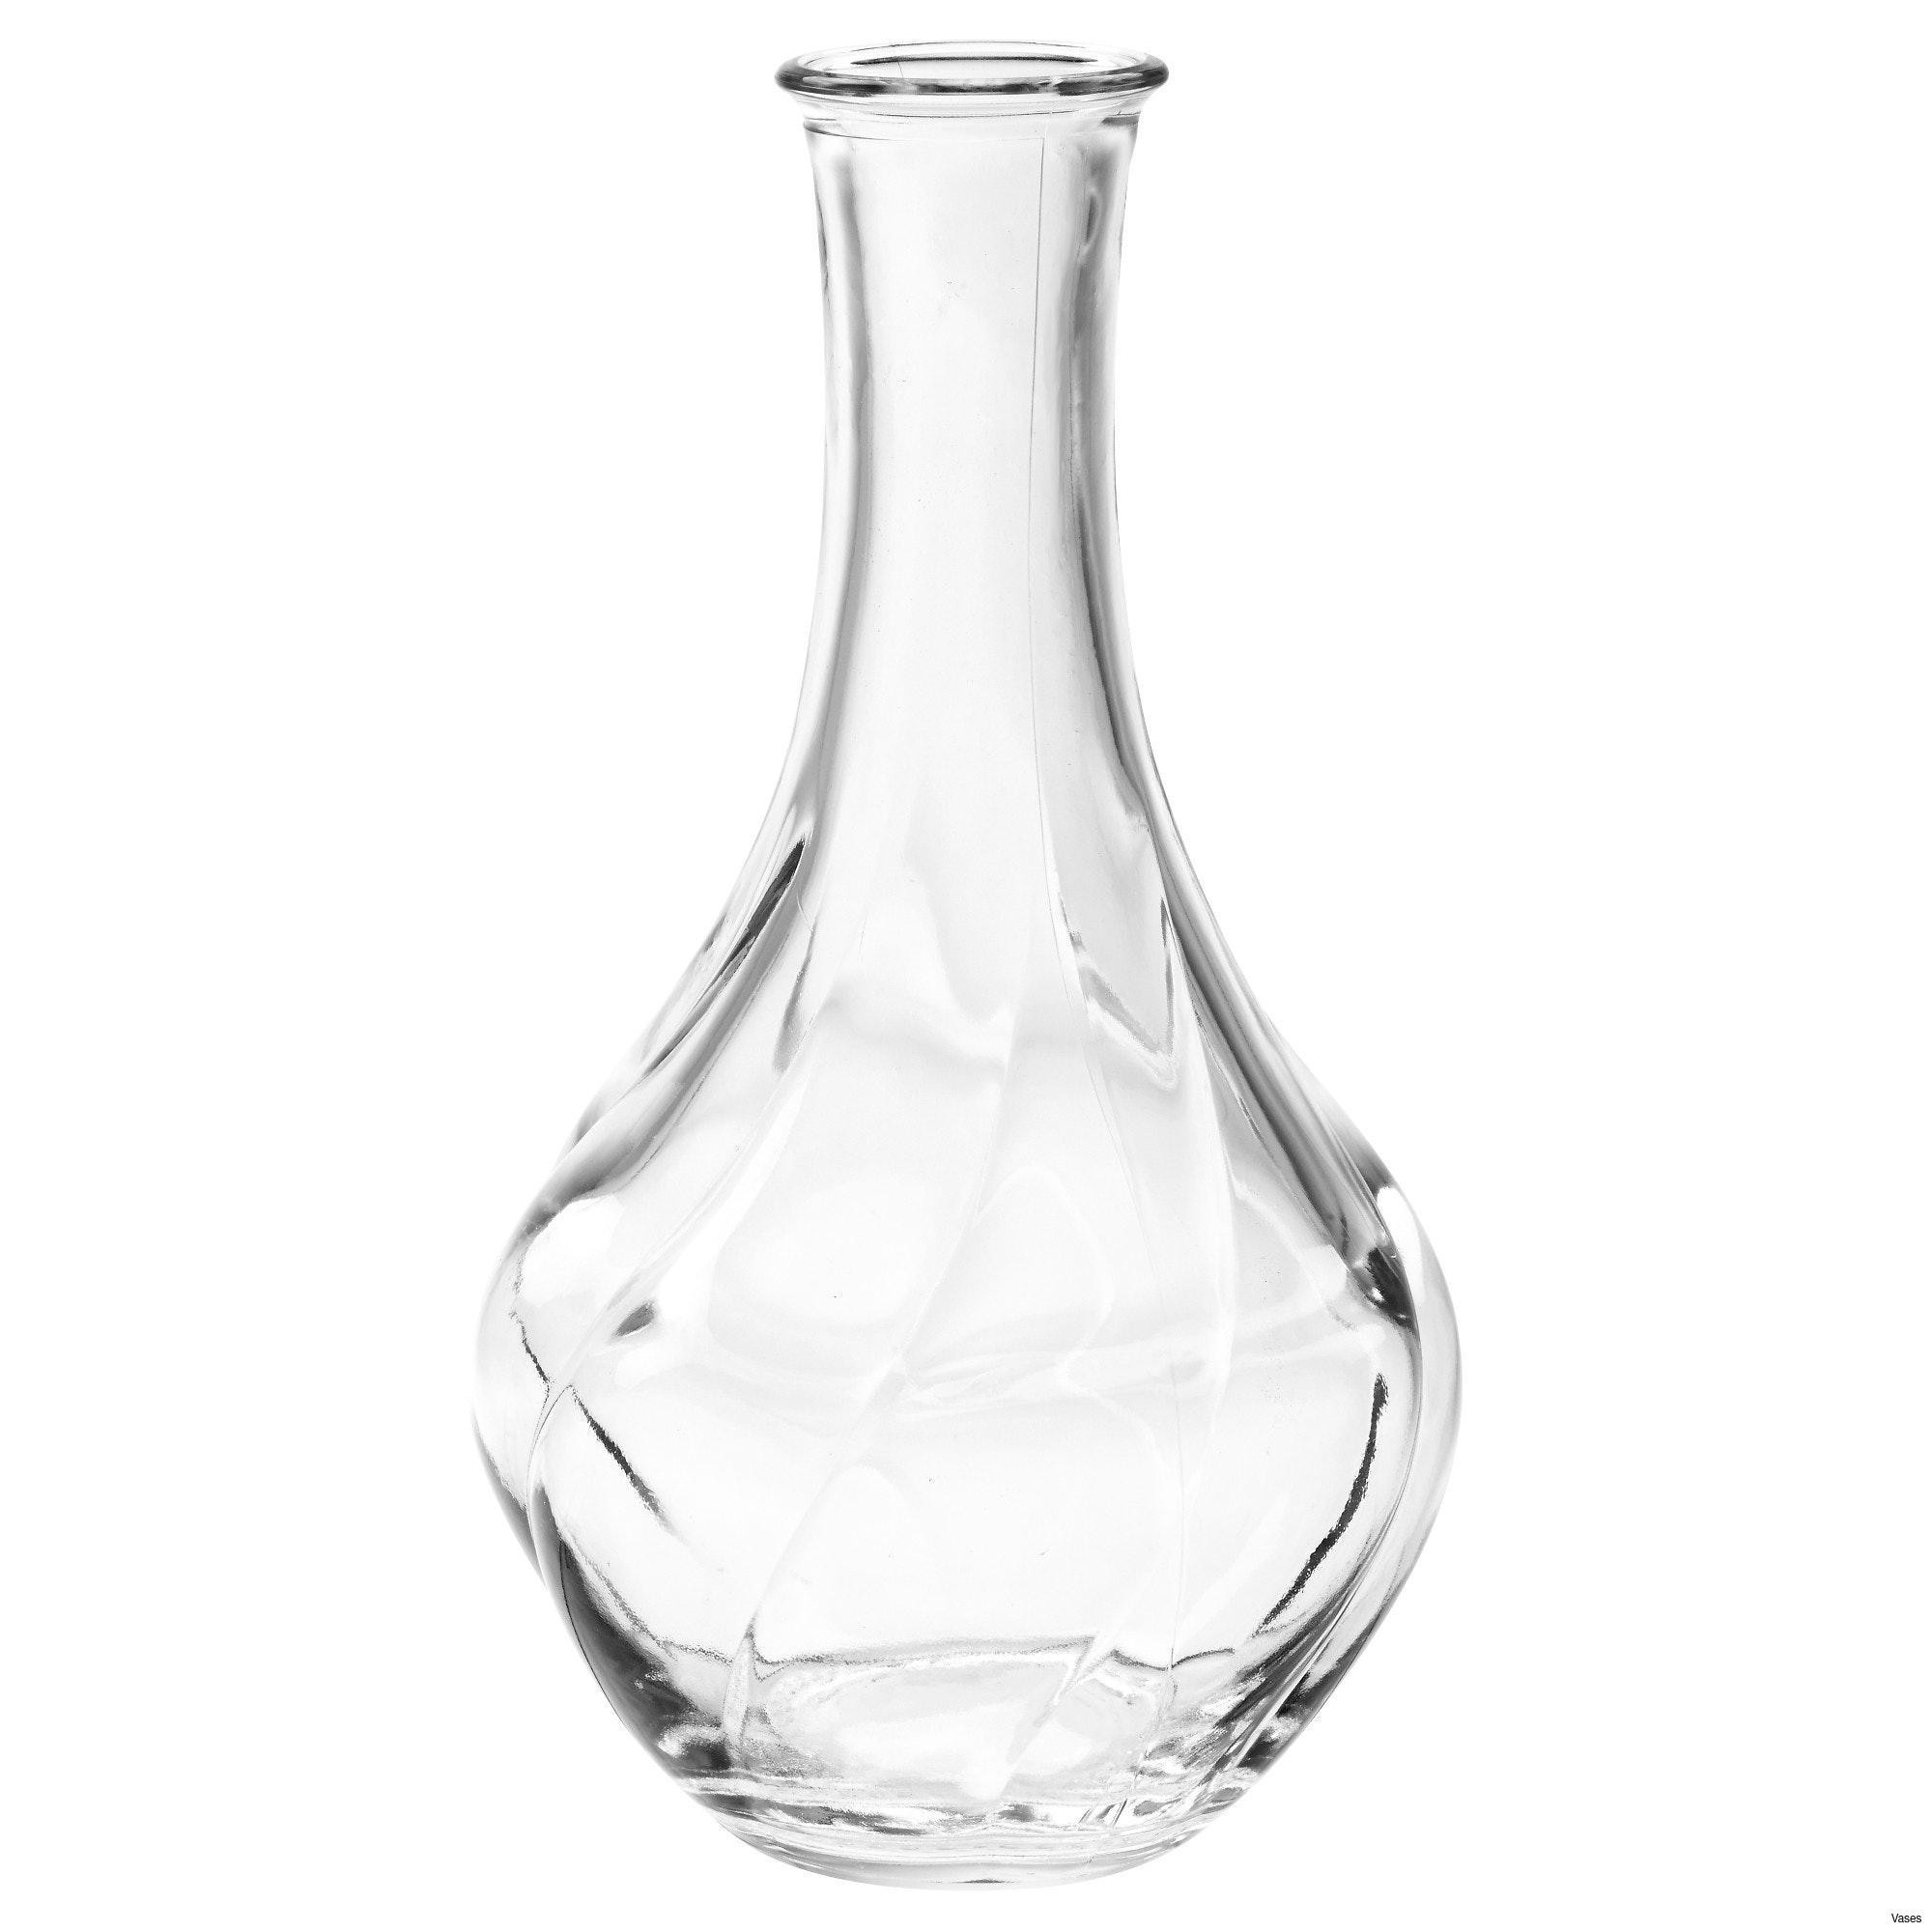 15 Elegant Very Large Glass Vase 2024 free download very large glass vase of collection of extra large glass vase vases artificial plants within extra large glass vase image living room glass vases fresh clear vase 0d tags amazing and